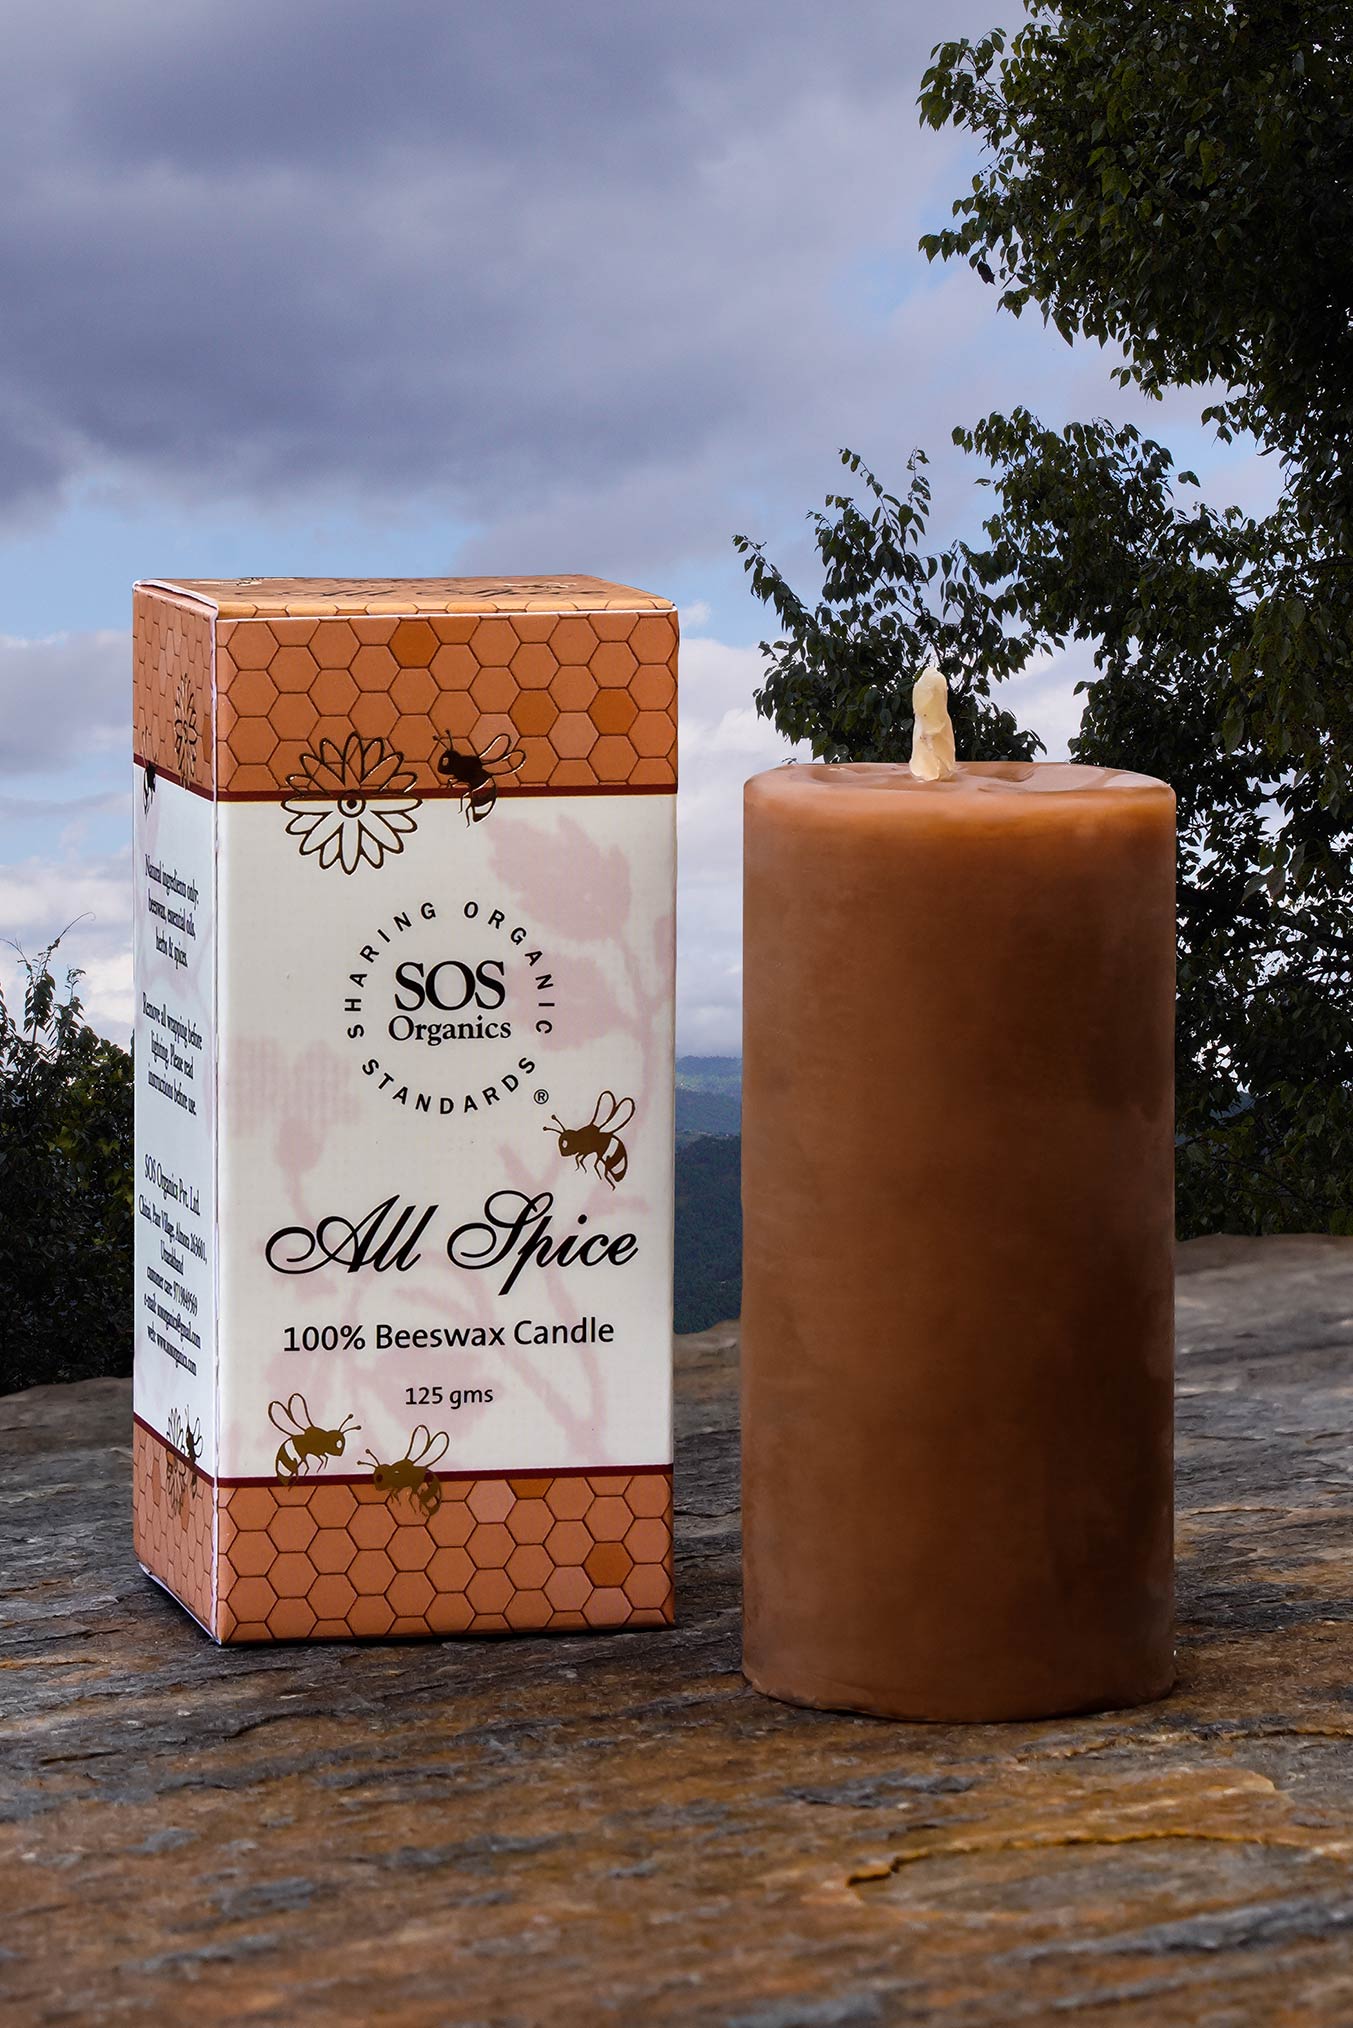 Hope Crow Beeswax Candle / 100% All Natural Bees Wax Candles / Pure and  Clean Burning / Bird / Star / Pillar / Honey Aroma / Animal Aviary 